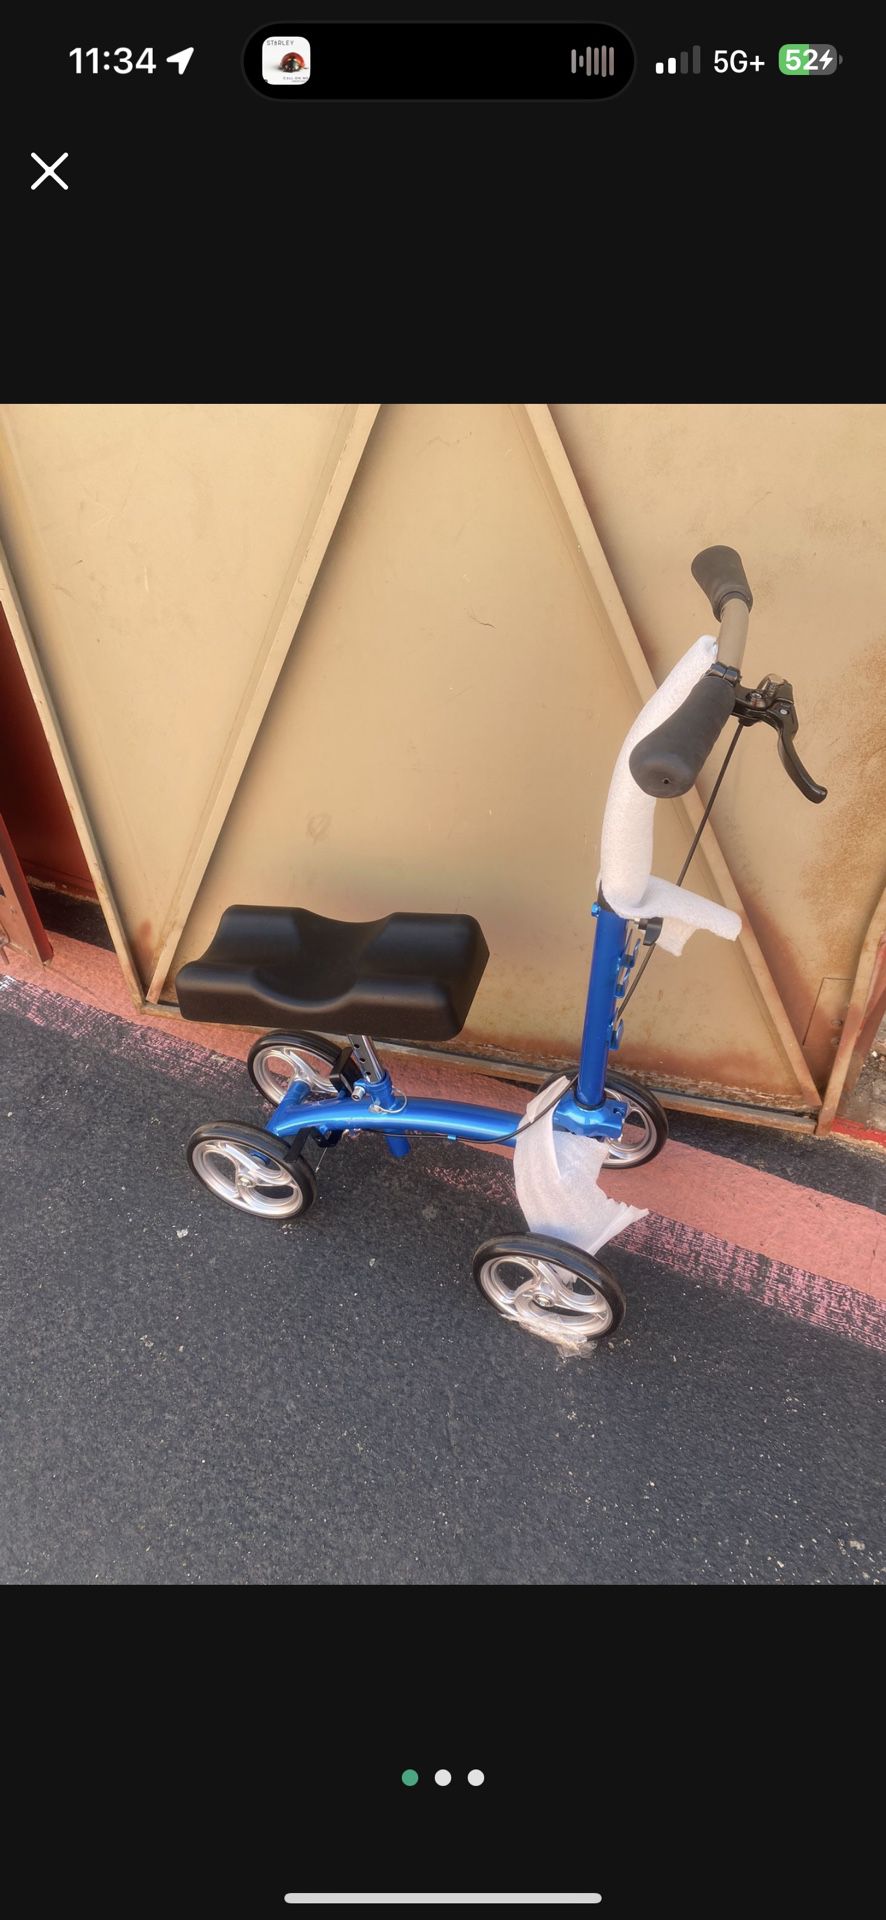 Brand New Knee Scooter In Box! 